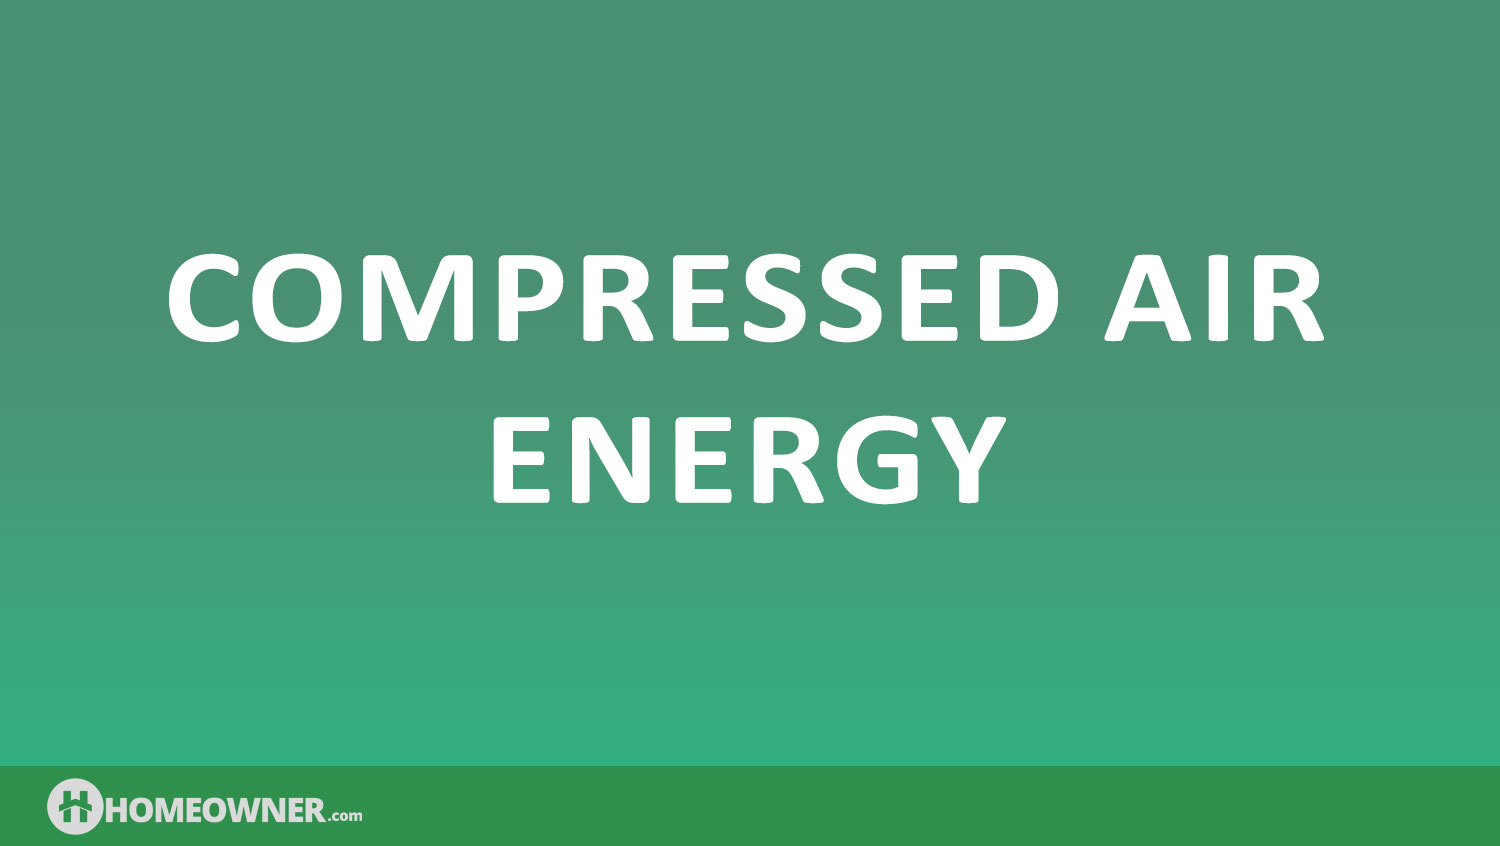 Compressed Air as a Form of Energy